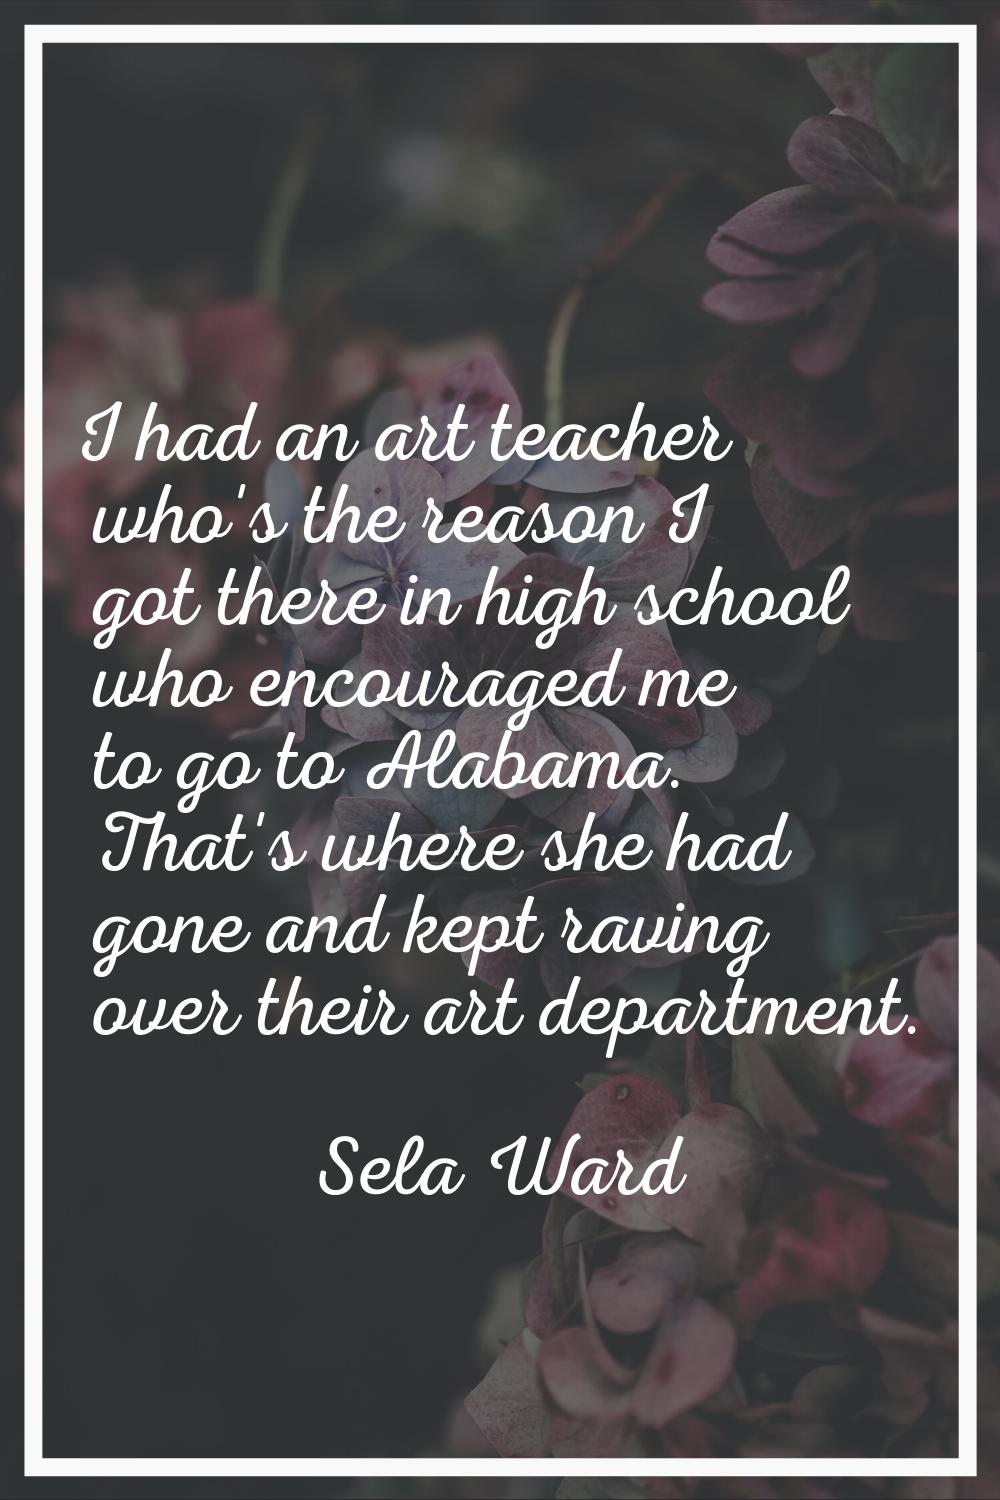 I had an art teacher who's the reason I got there in high school who encouraged me to go to Alabama